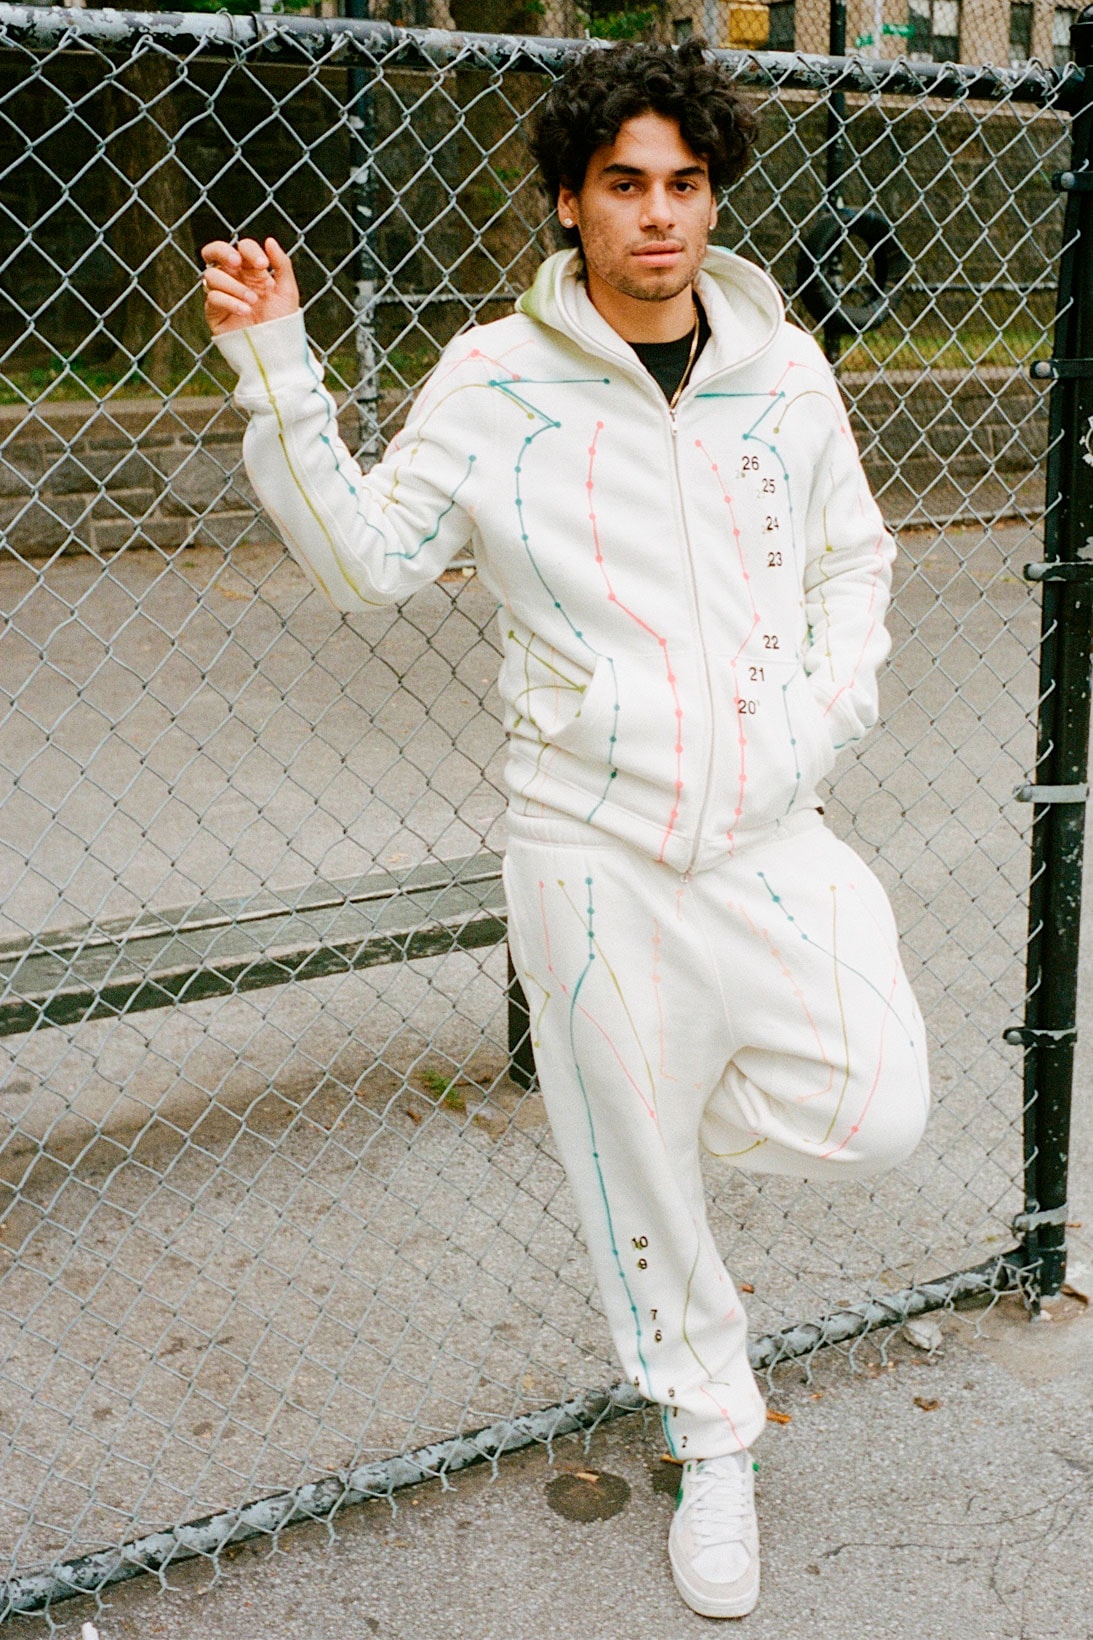 BRUJAS "WORLD SHINE" Collection white sweatsuit acupuncture